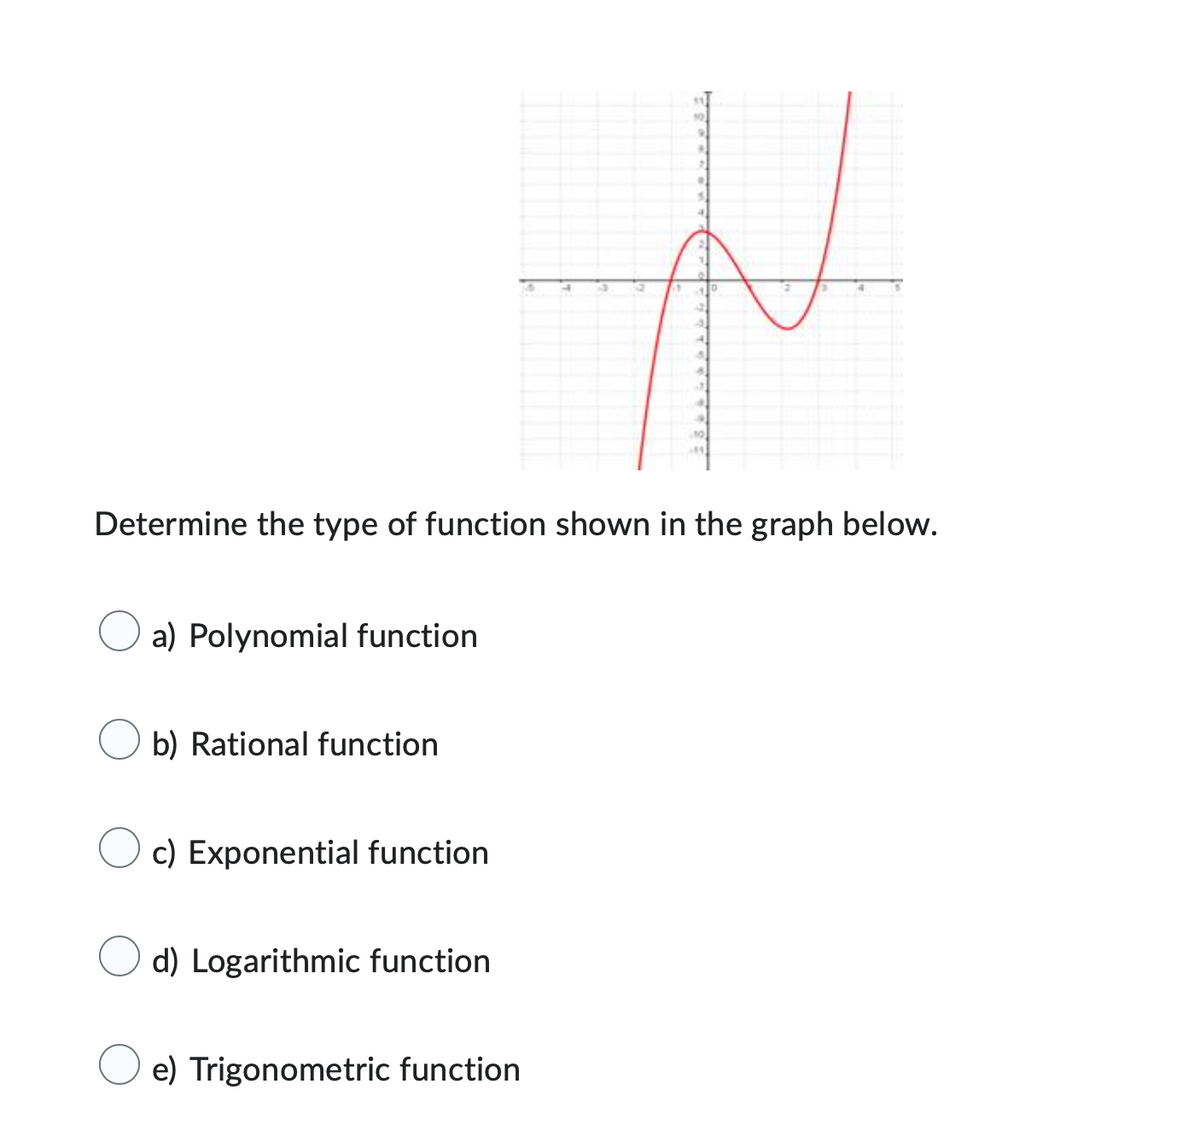 a) Polynomial function
b) Rational function
Determine the type of function shown in the graph below.
c) Exponential function
d) Logarithmic function
F
e) Trigonometric function
3
111